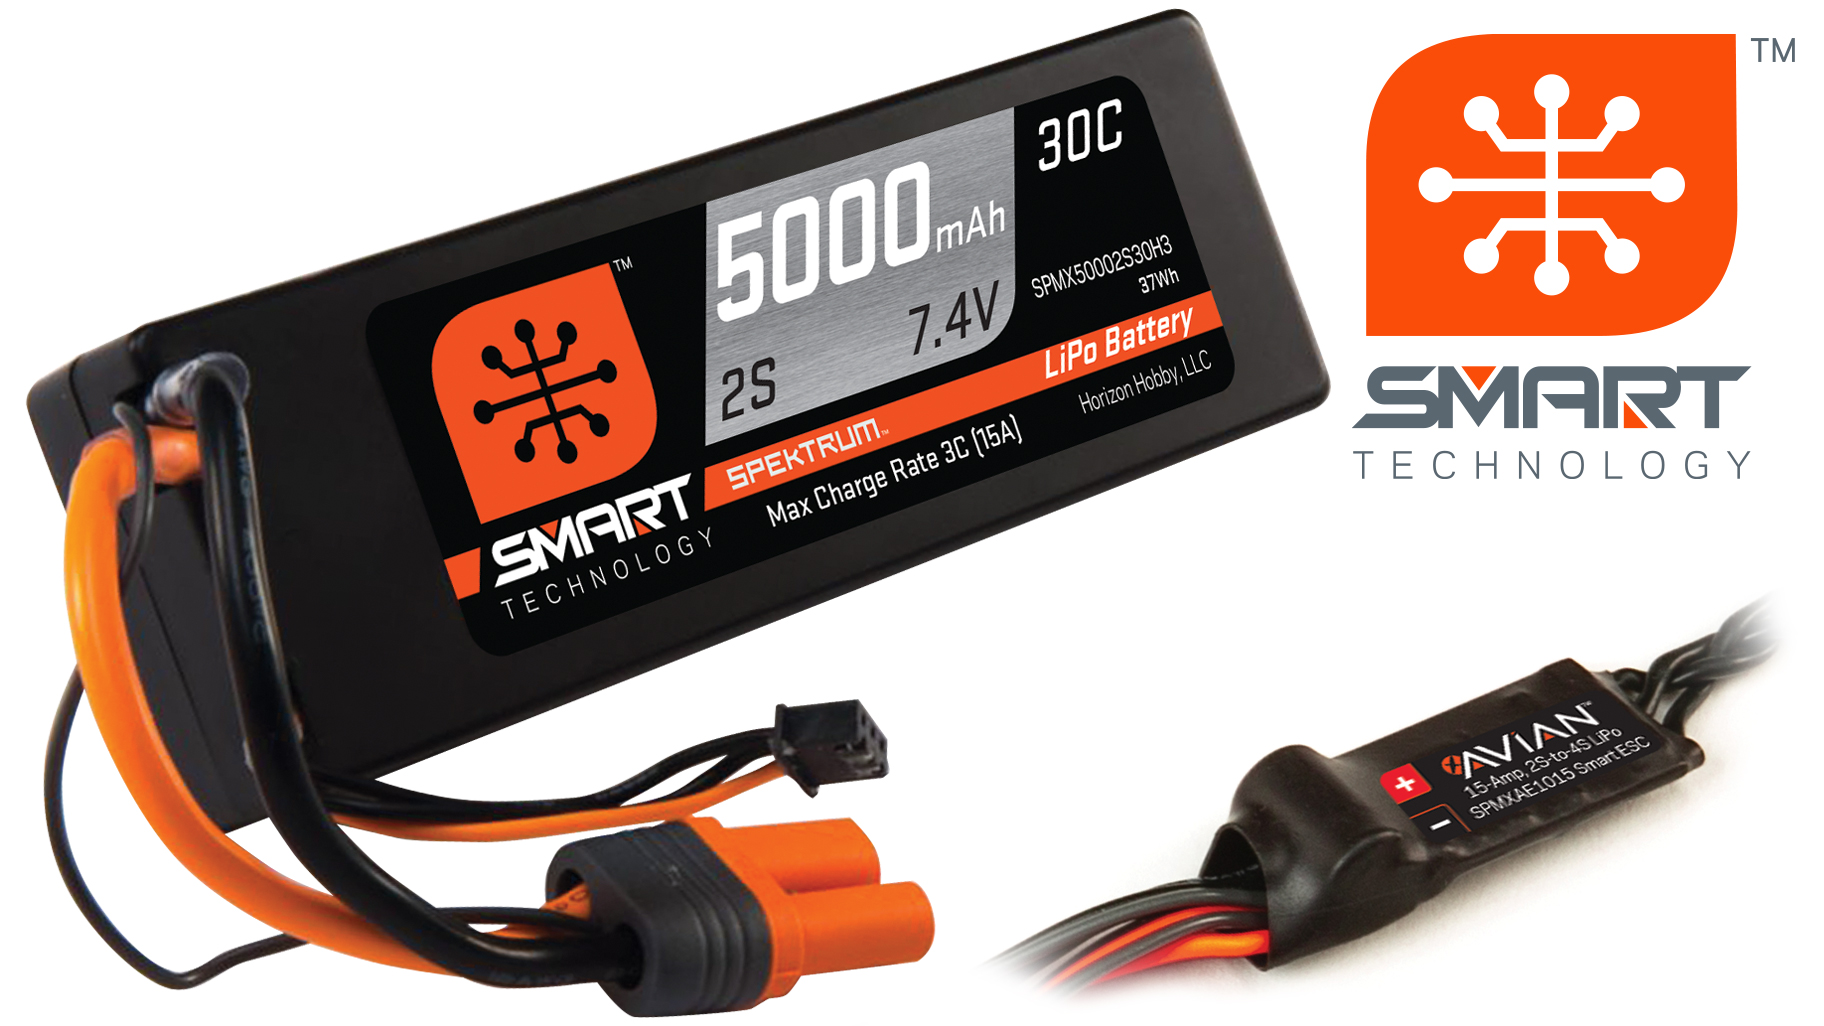 Spektrum SMART LiPo battery and AVIAN ESC. Products not included